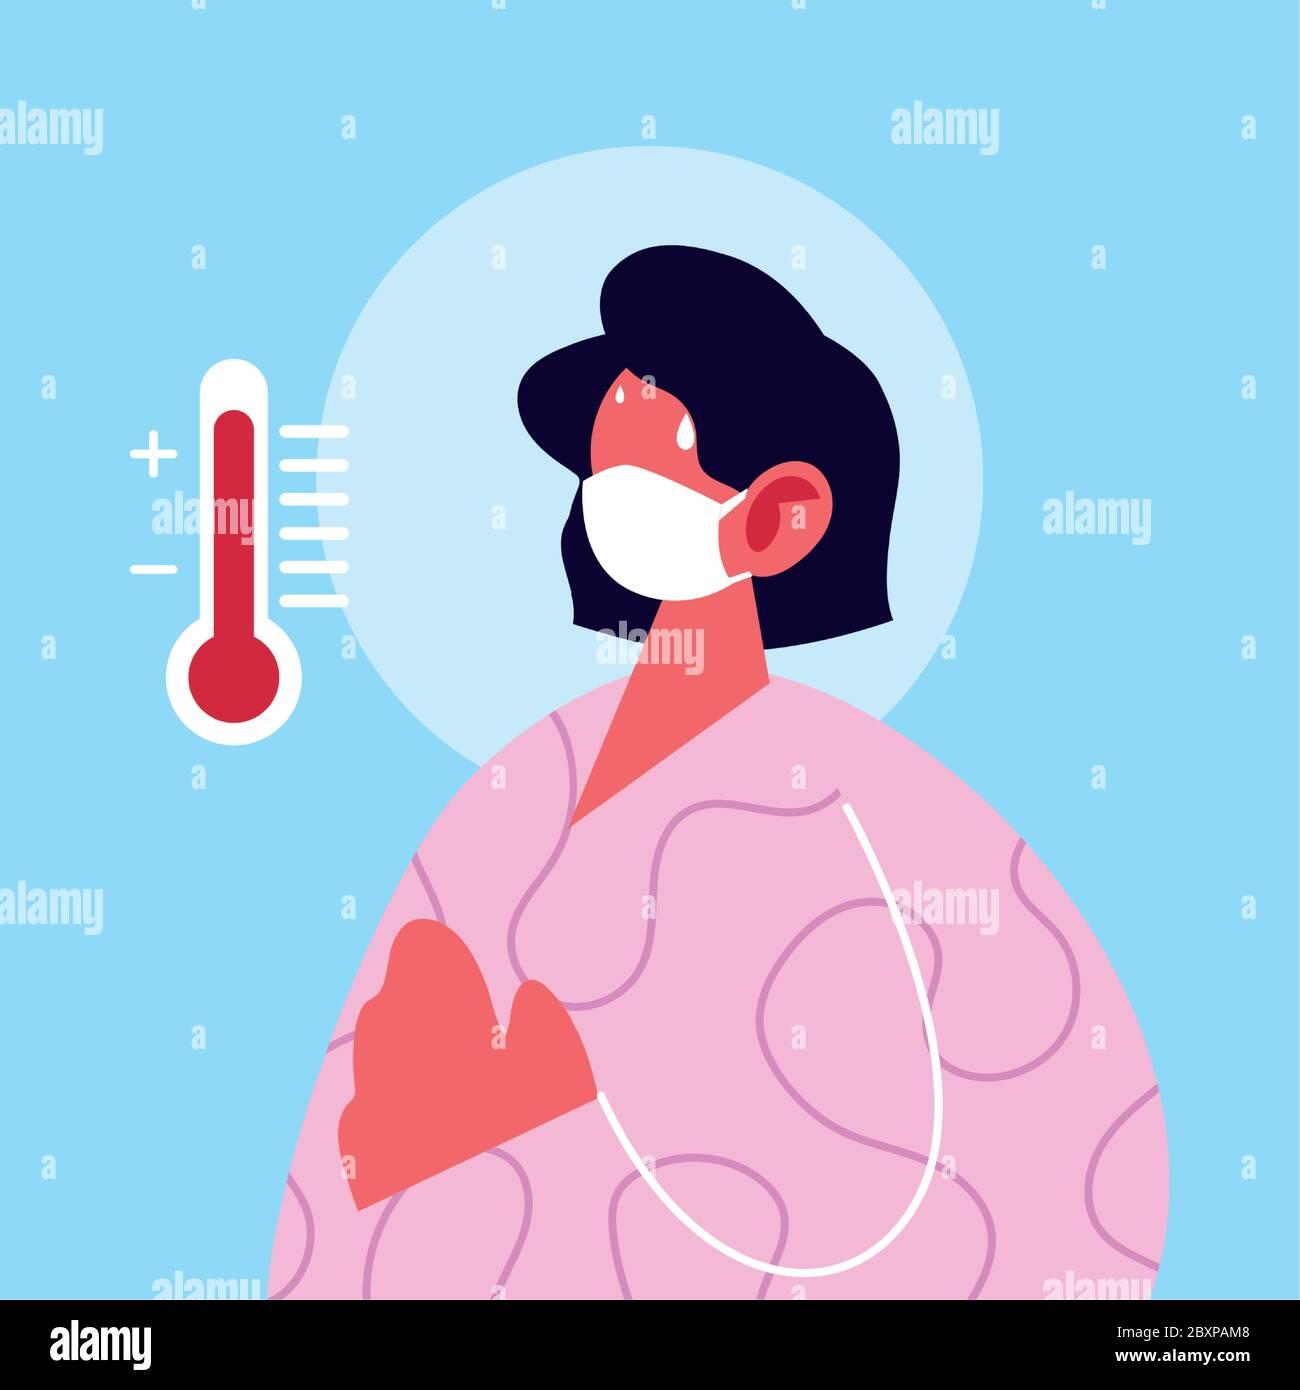 Woman cartoon with fever and thermometer design of Medical care health and emergency theme Vector illustration Stock Vector